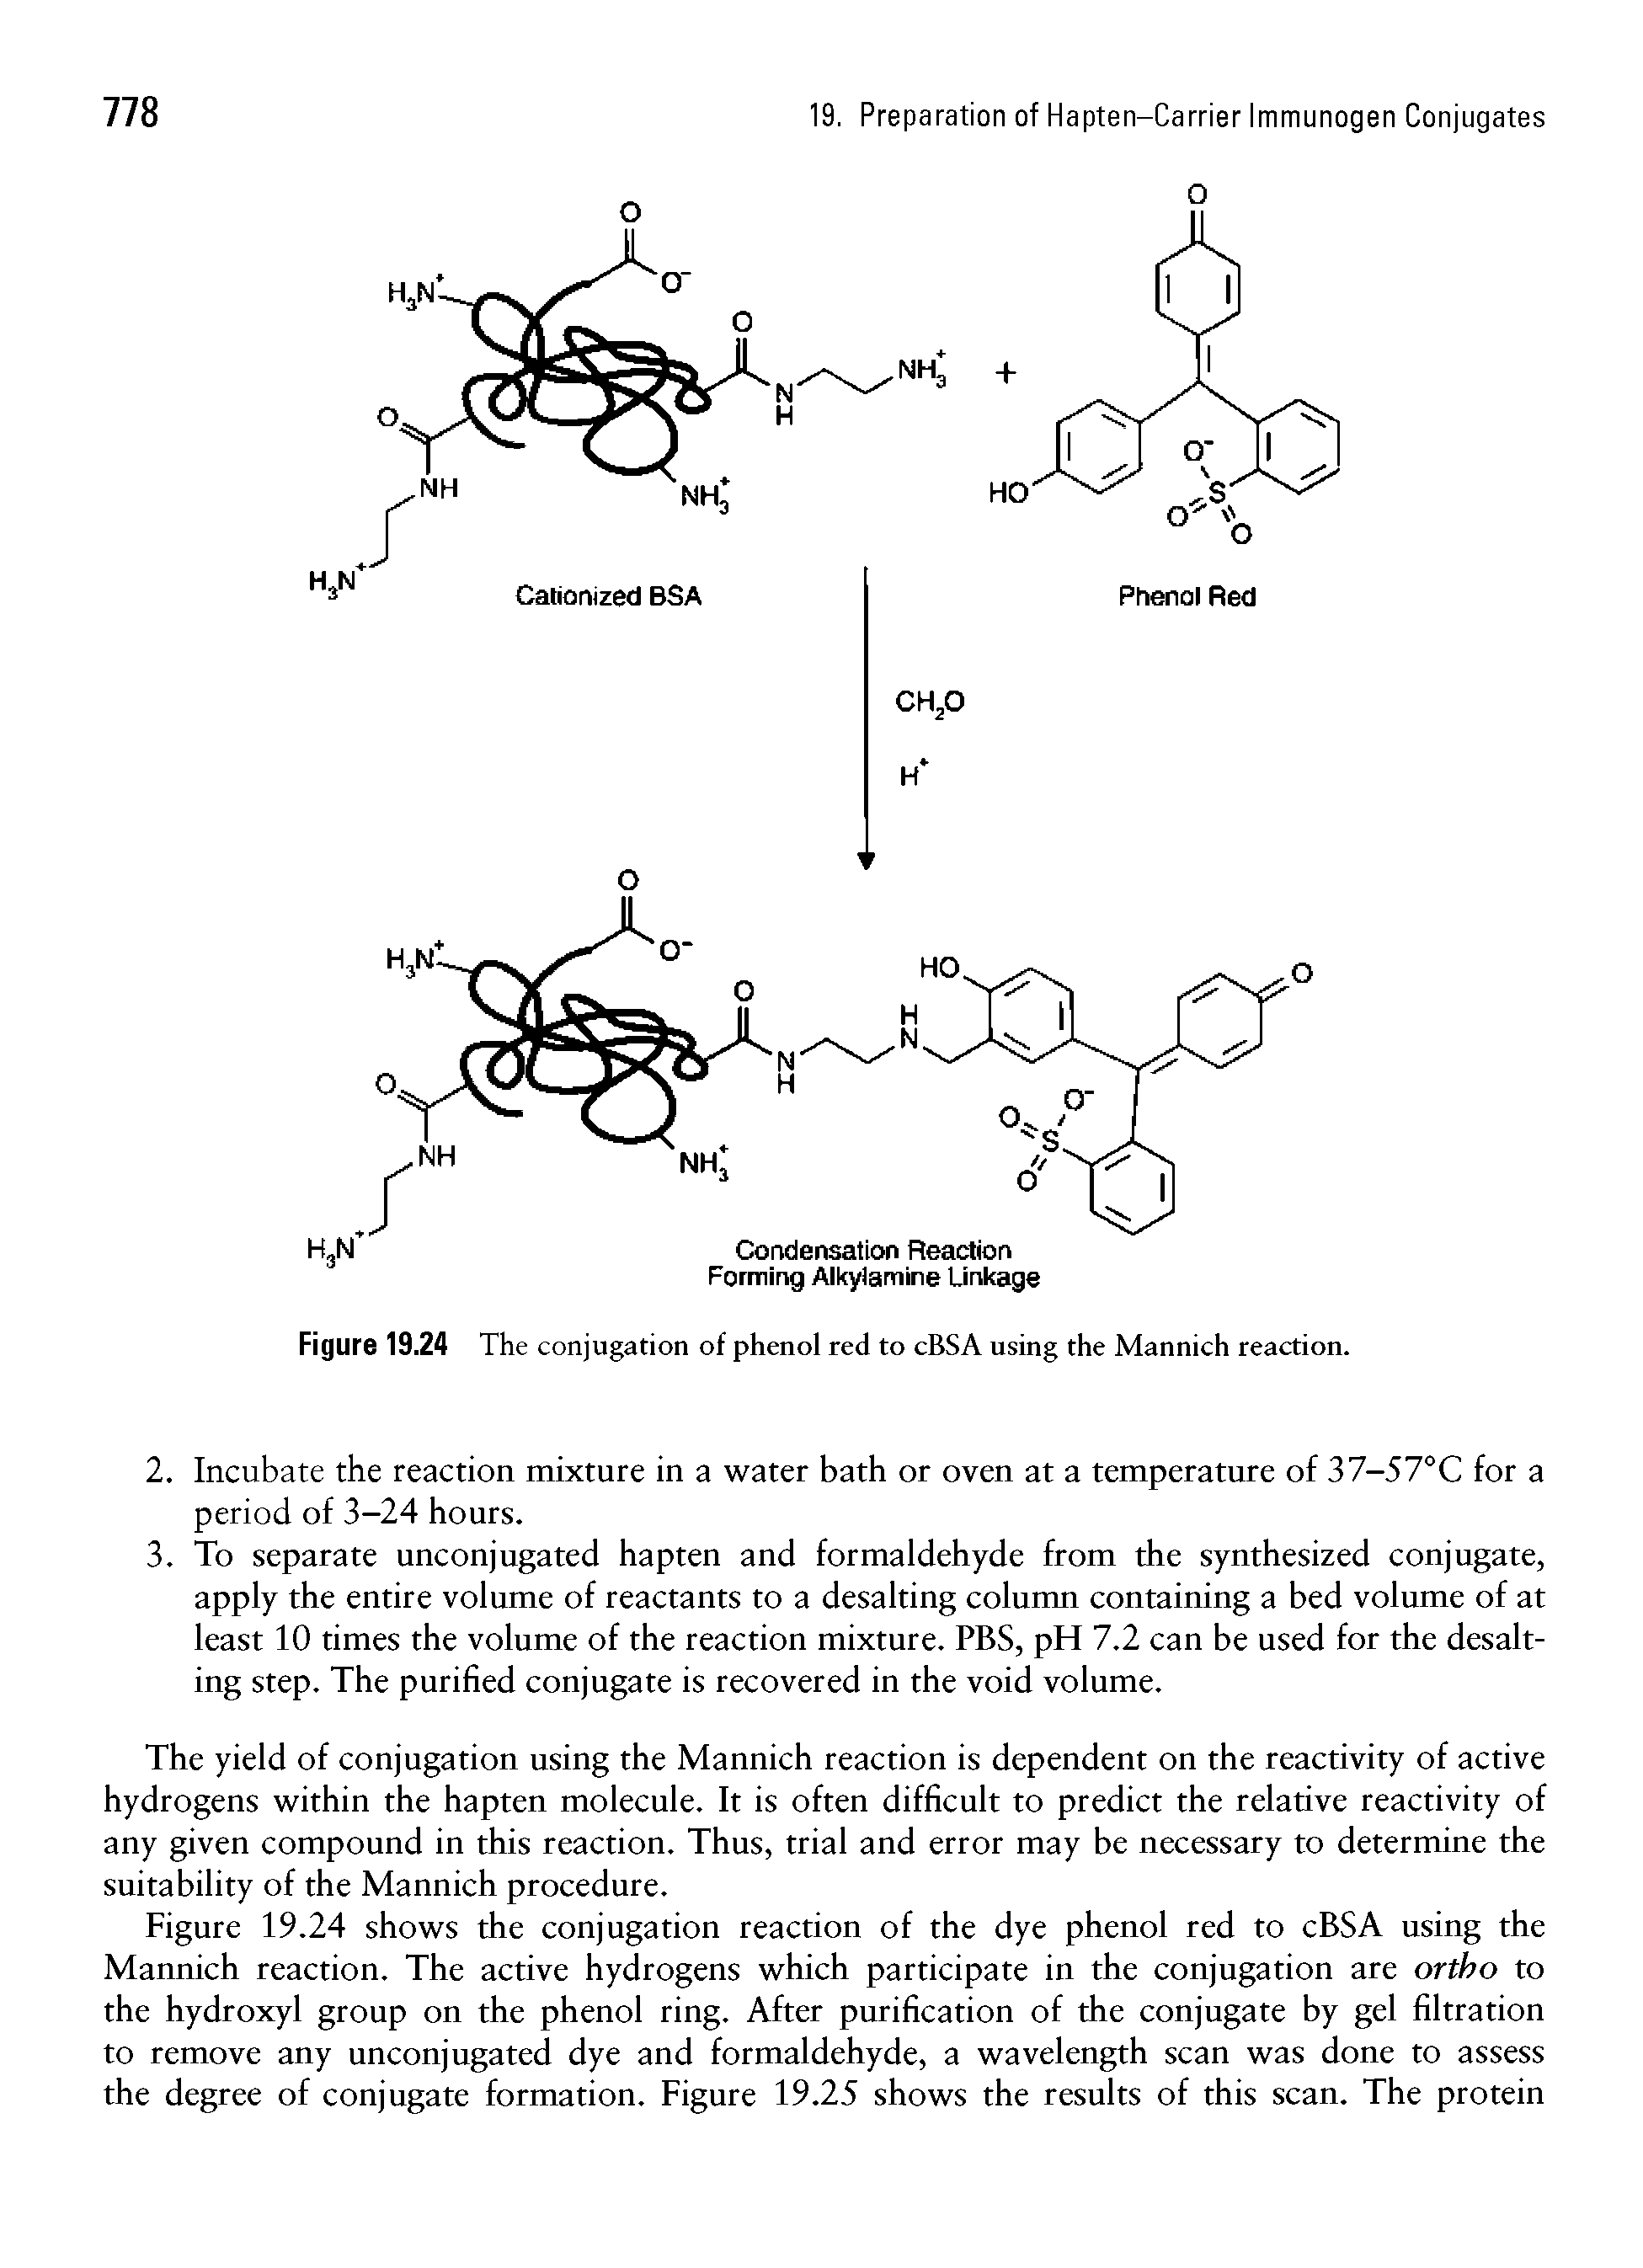 Figure 19.24 The conjugation of phenol red to cBSA using the Mannich reaction.